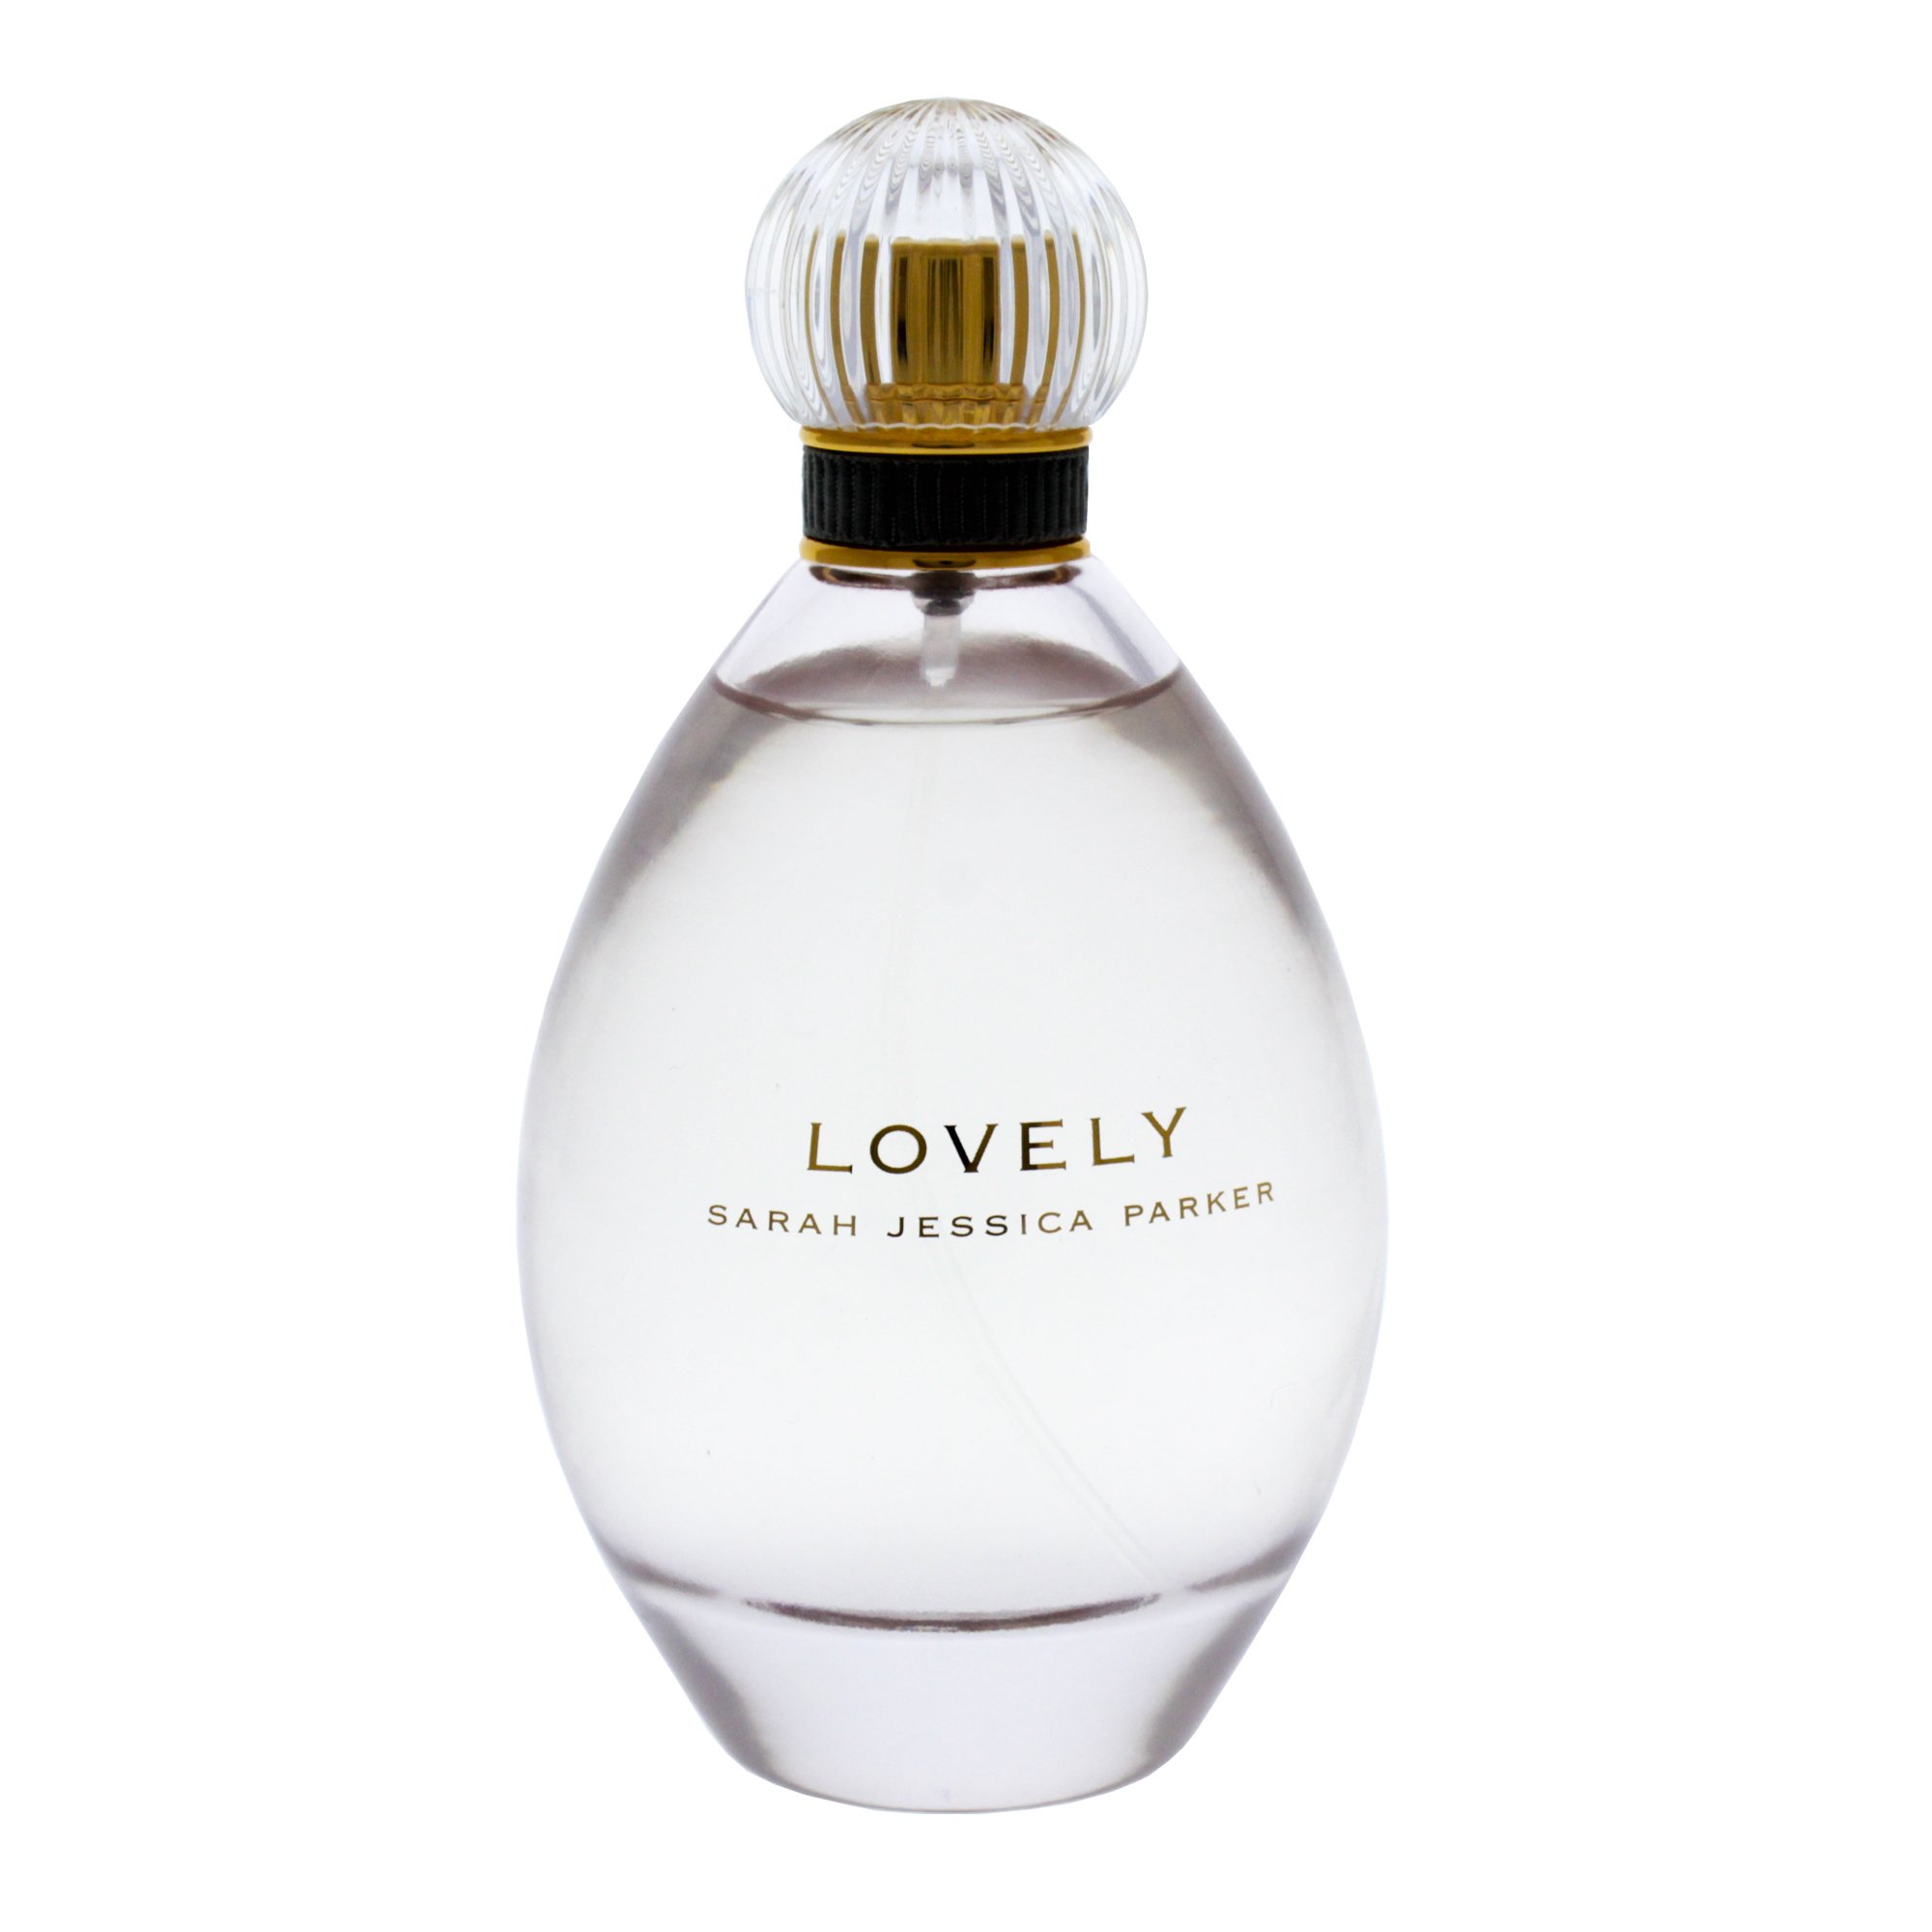 Beauty Gifts for her with lovely perfume